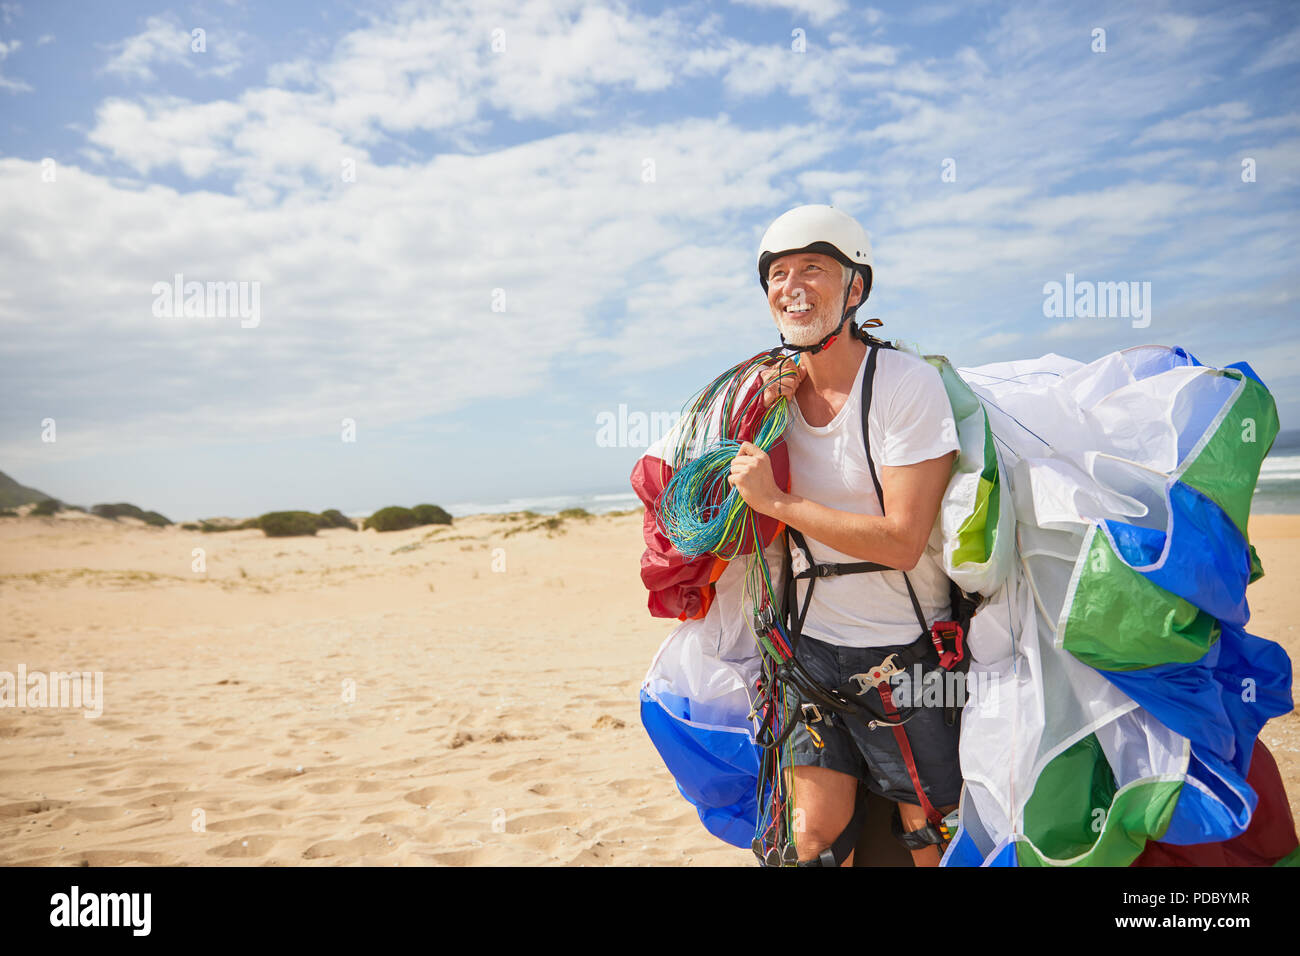 Smiling male paraglider carrying equipment and parachute on sunny beach Stock Photo